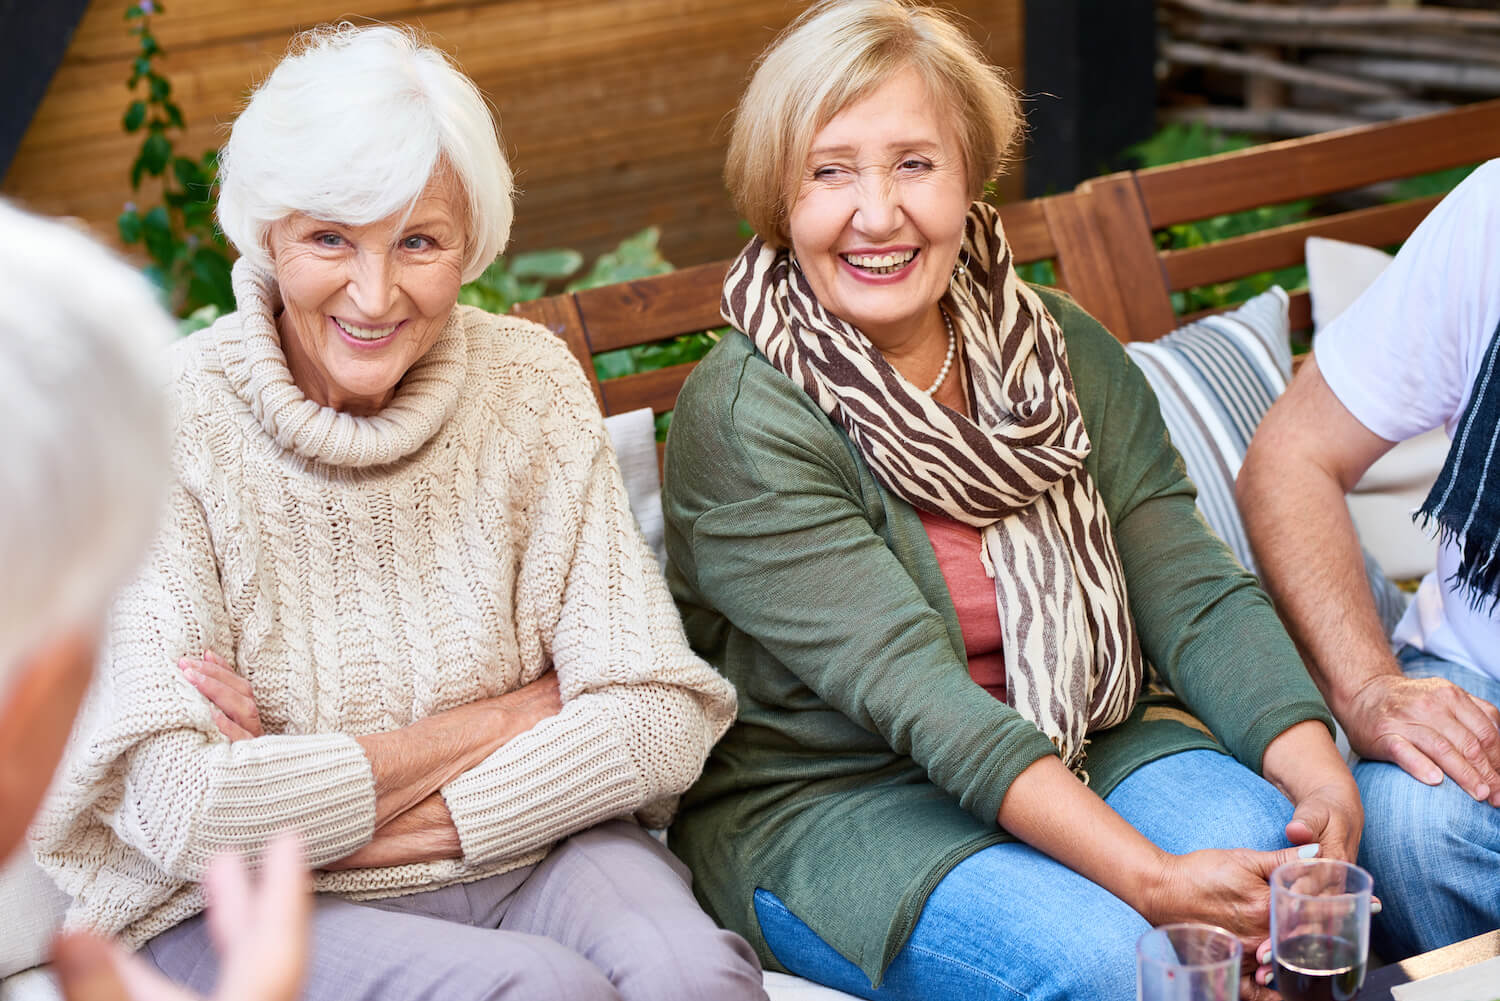 Senior women laughing and socializing on a park bench